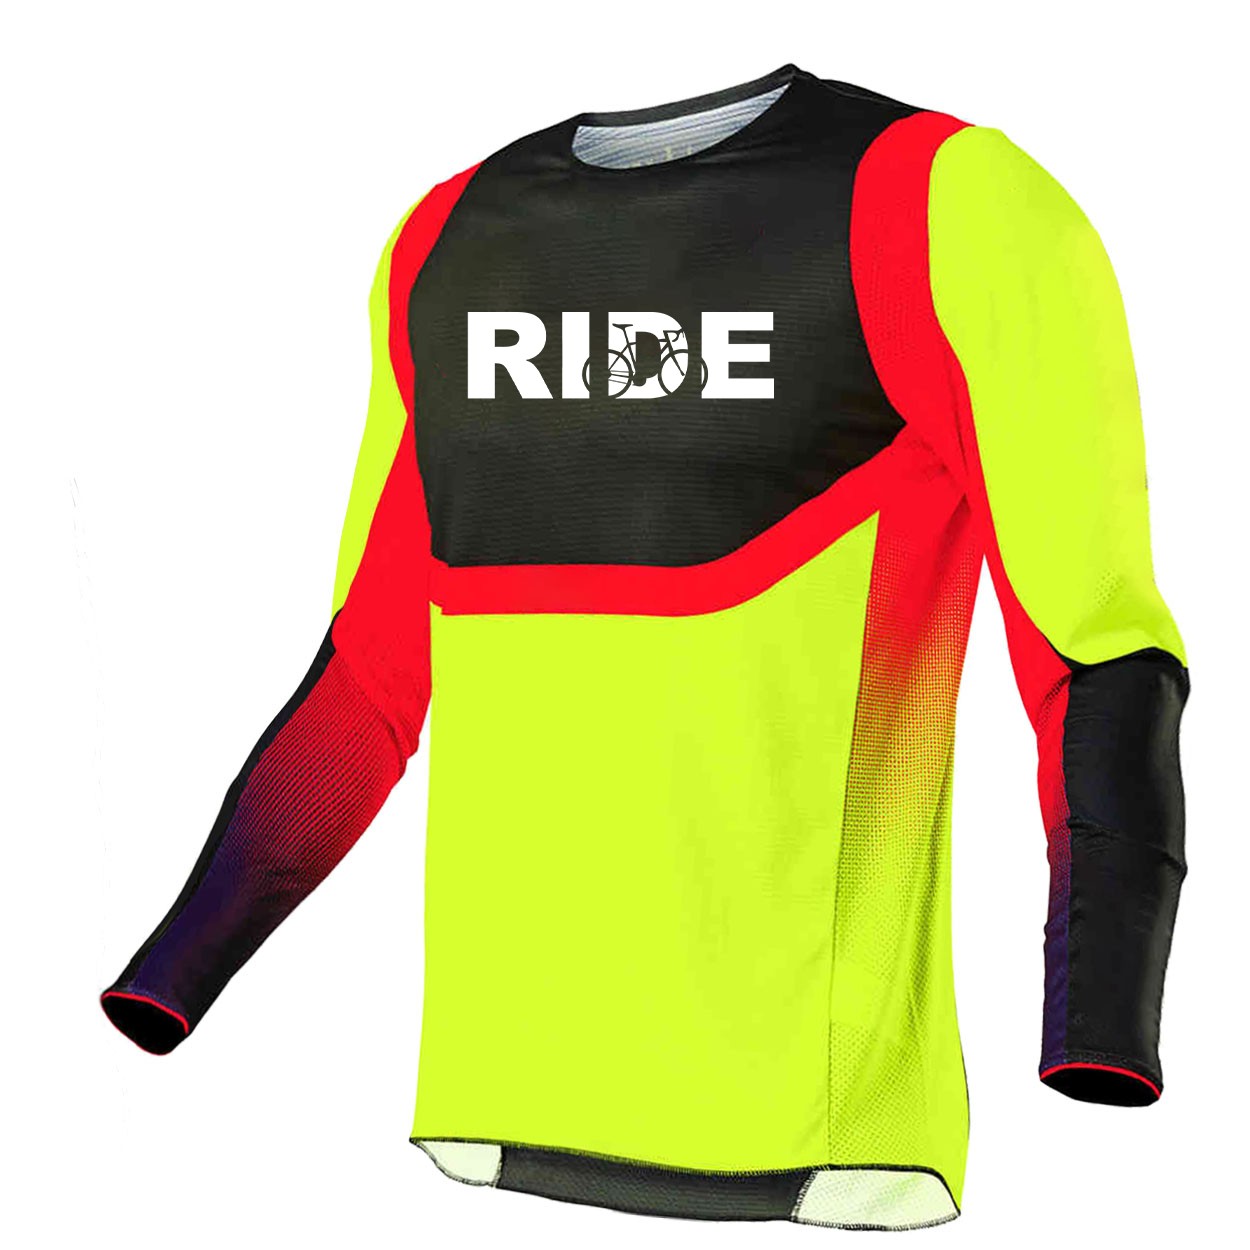 Ride Cycle Logo Classic Performance Jersey Long Sleeve Shirt Black/Yellow/Red